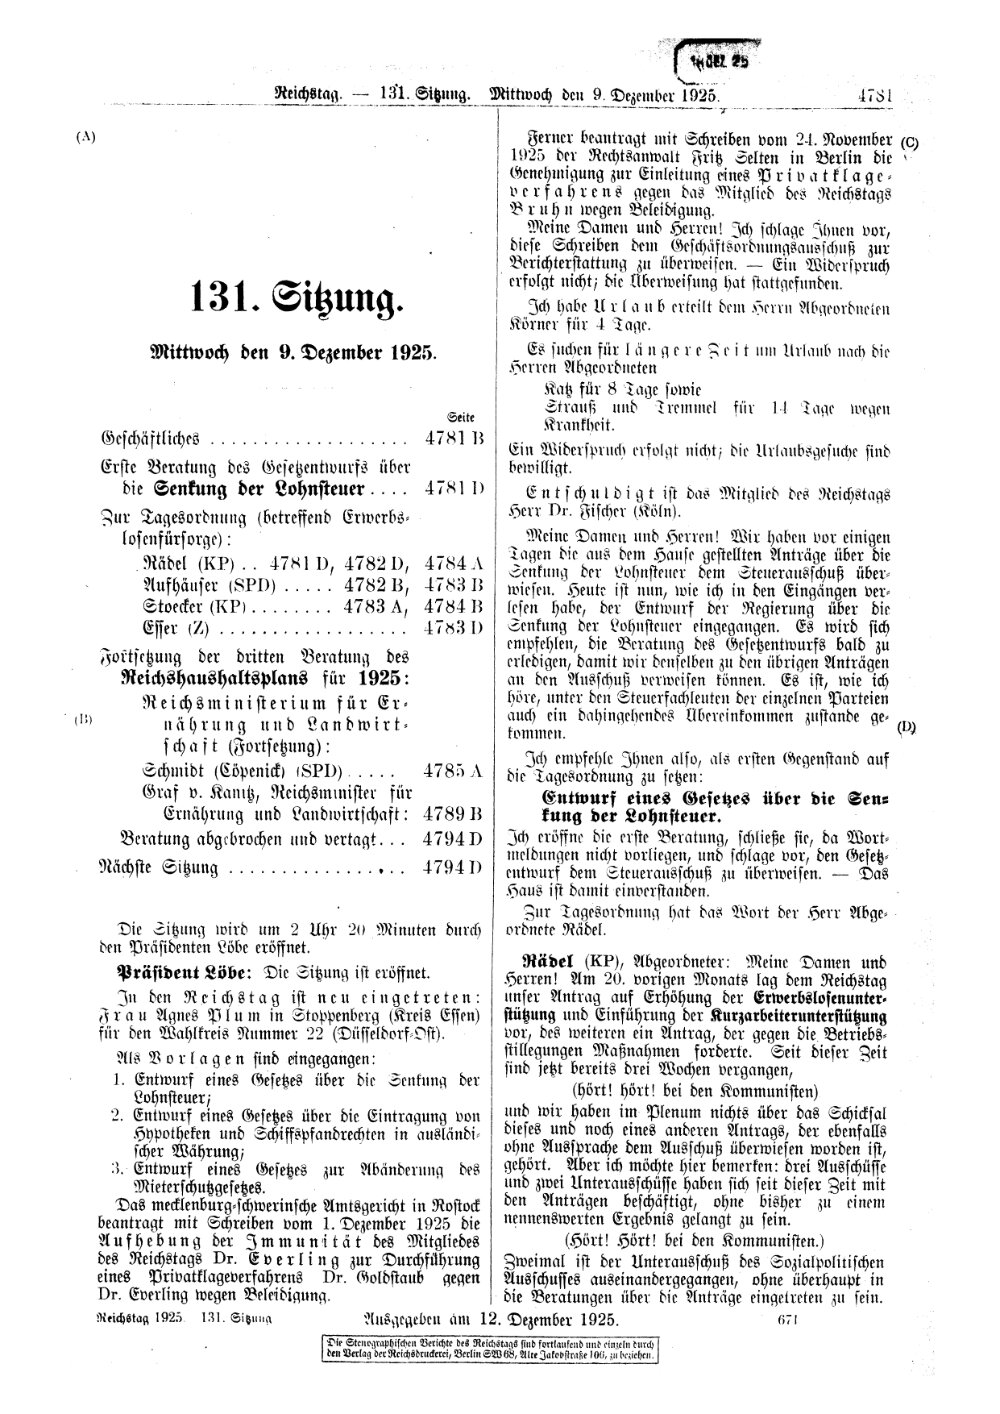 Scan of page 4781